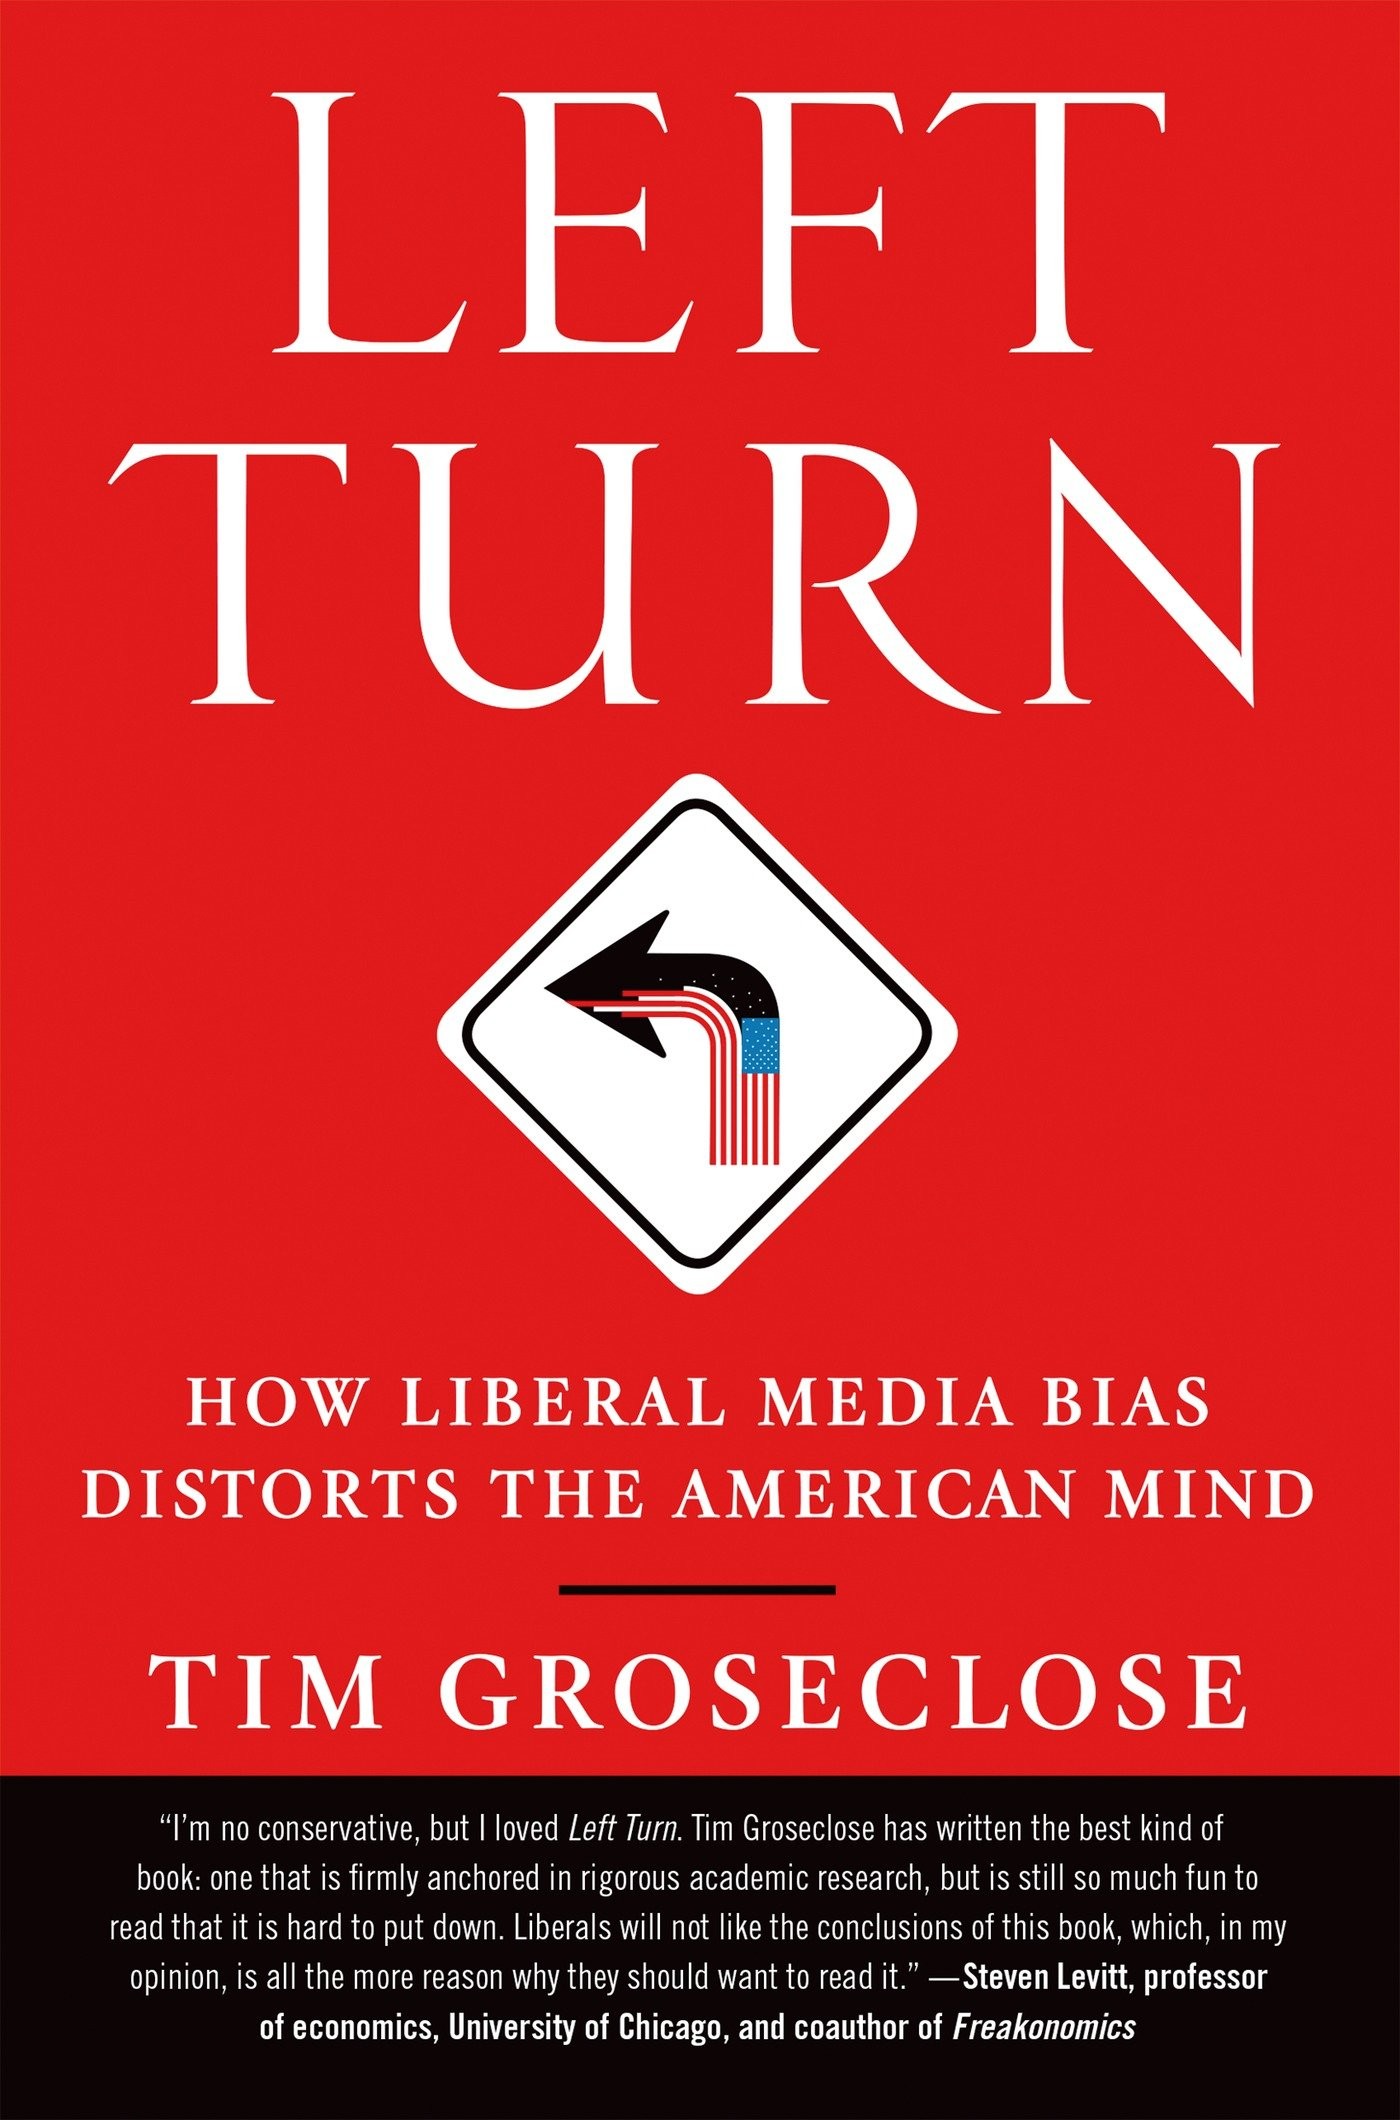 Left Turn: How Liberal Media Bias Distorts the American Mind